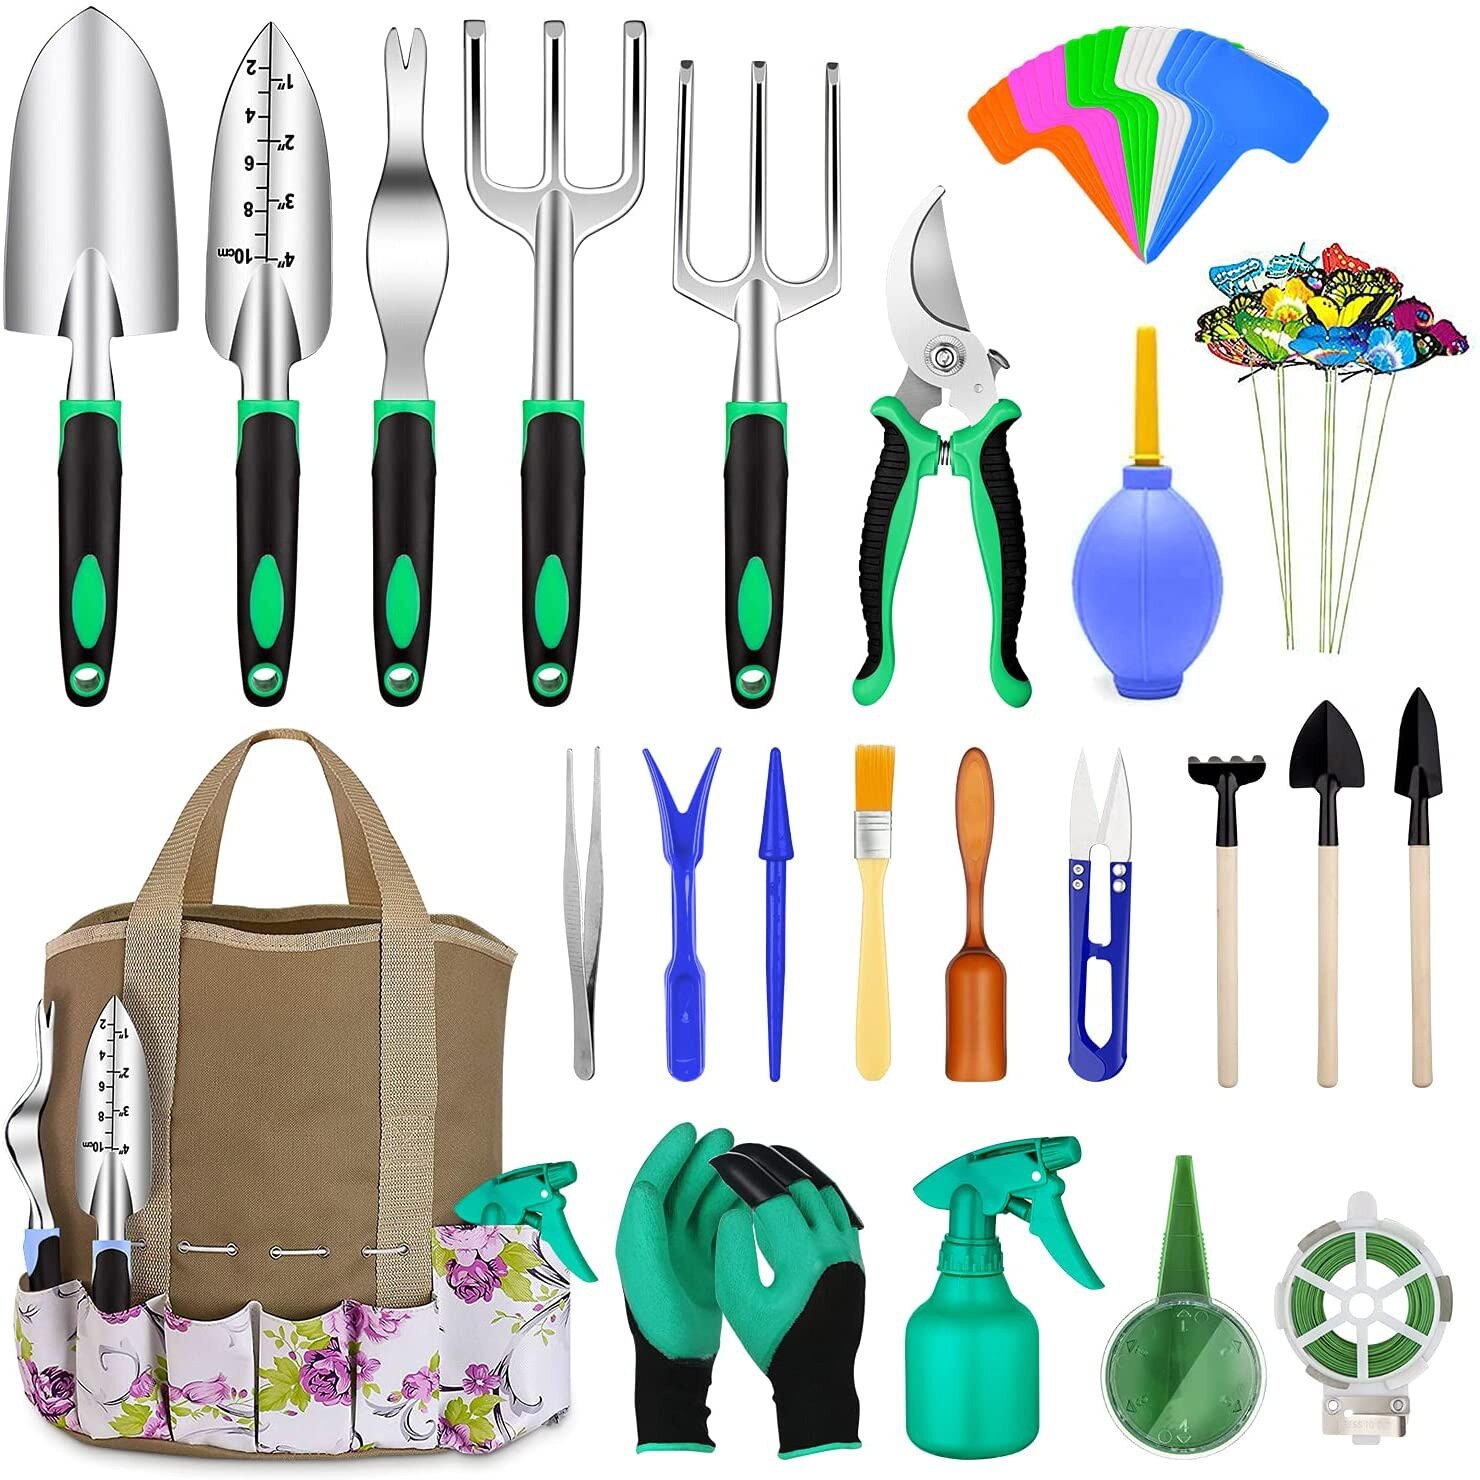 Image of 82 Pcs Aluminum Garden Tools Set Heavy Duty Gardening Tools with Soft Rubber Anti-skid Handle